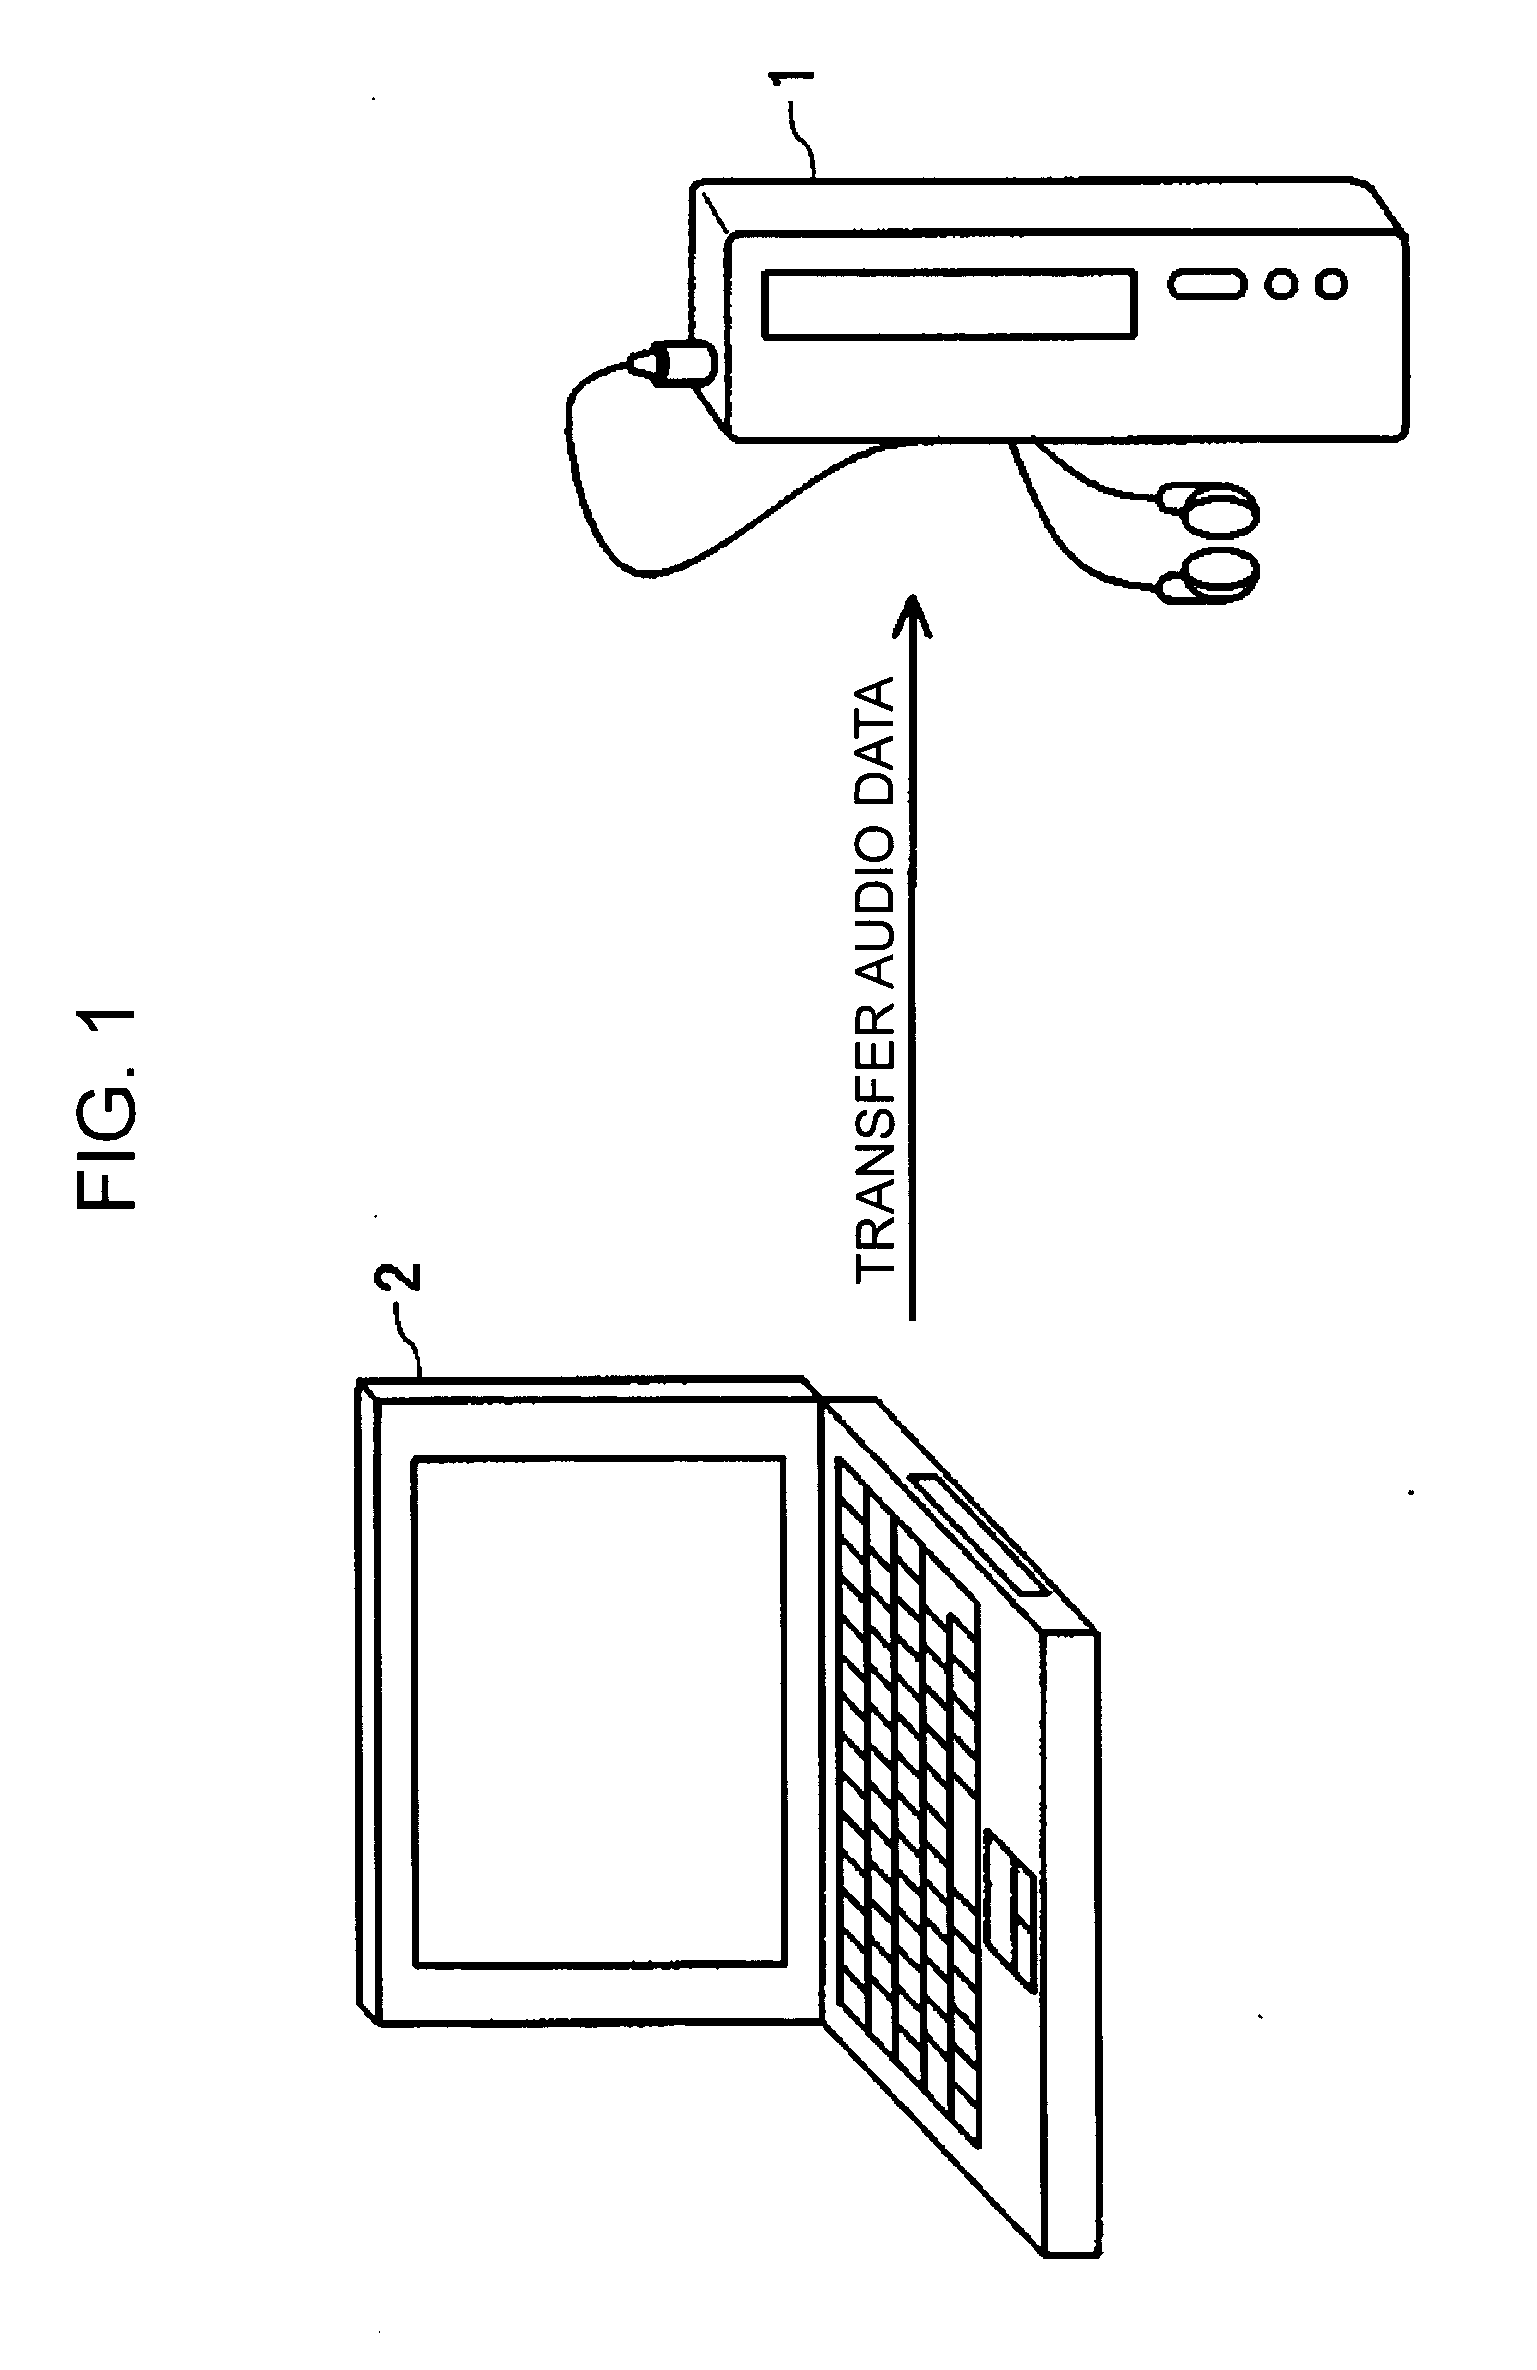 Recording-and-reproducing apparatus, information transfer-and-management method, and recording medium